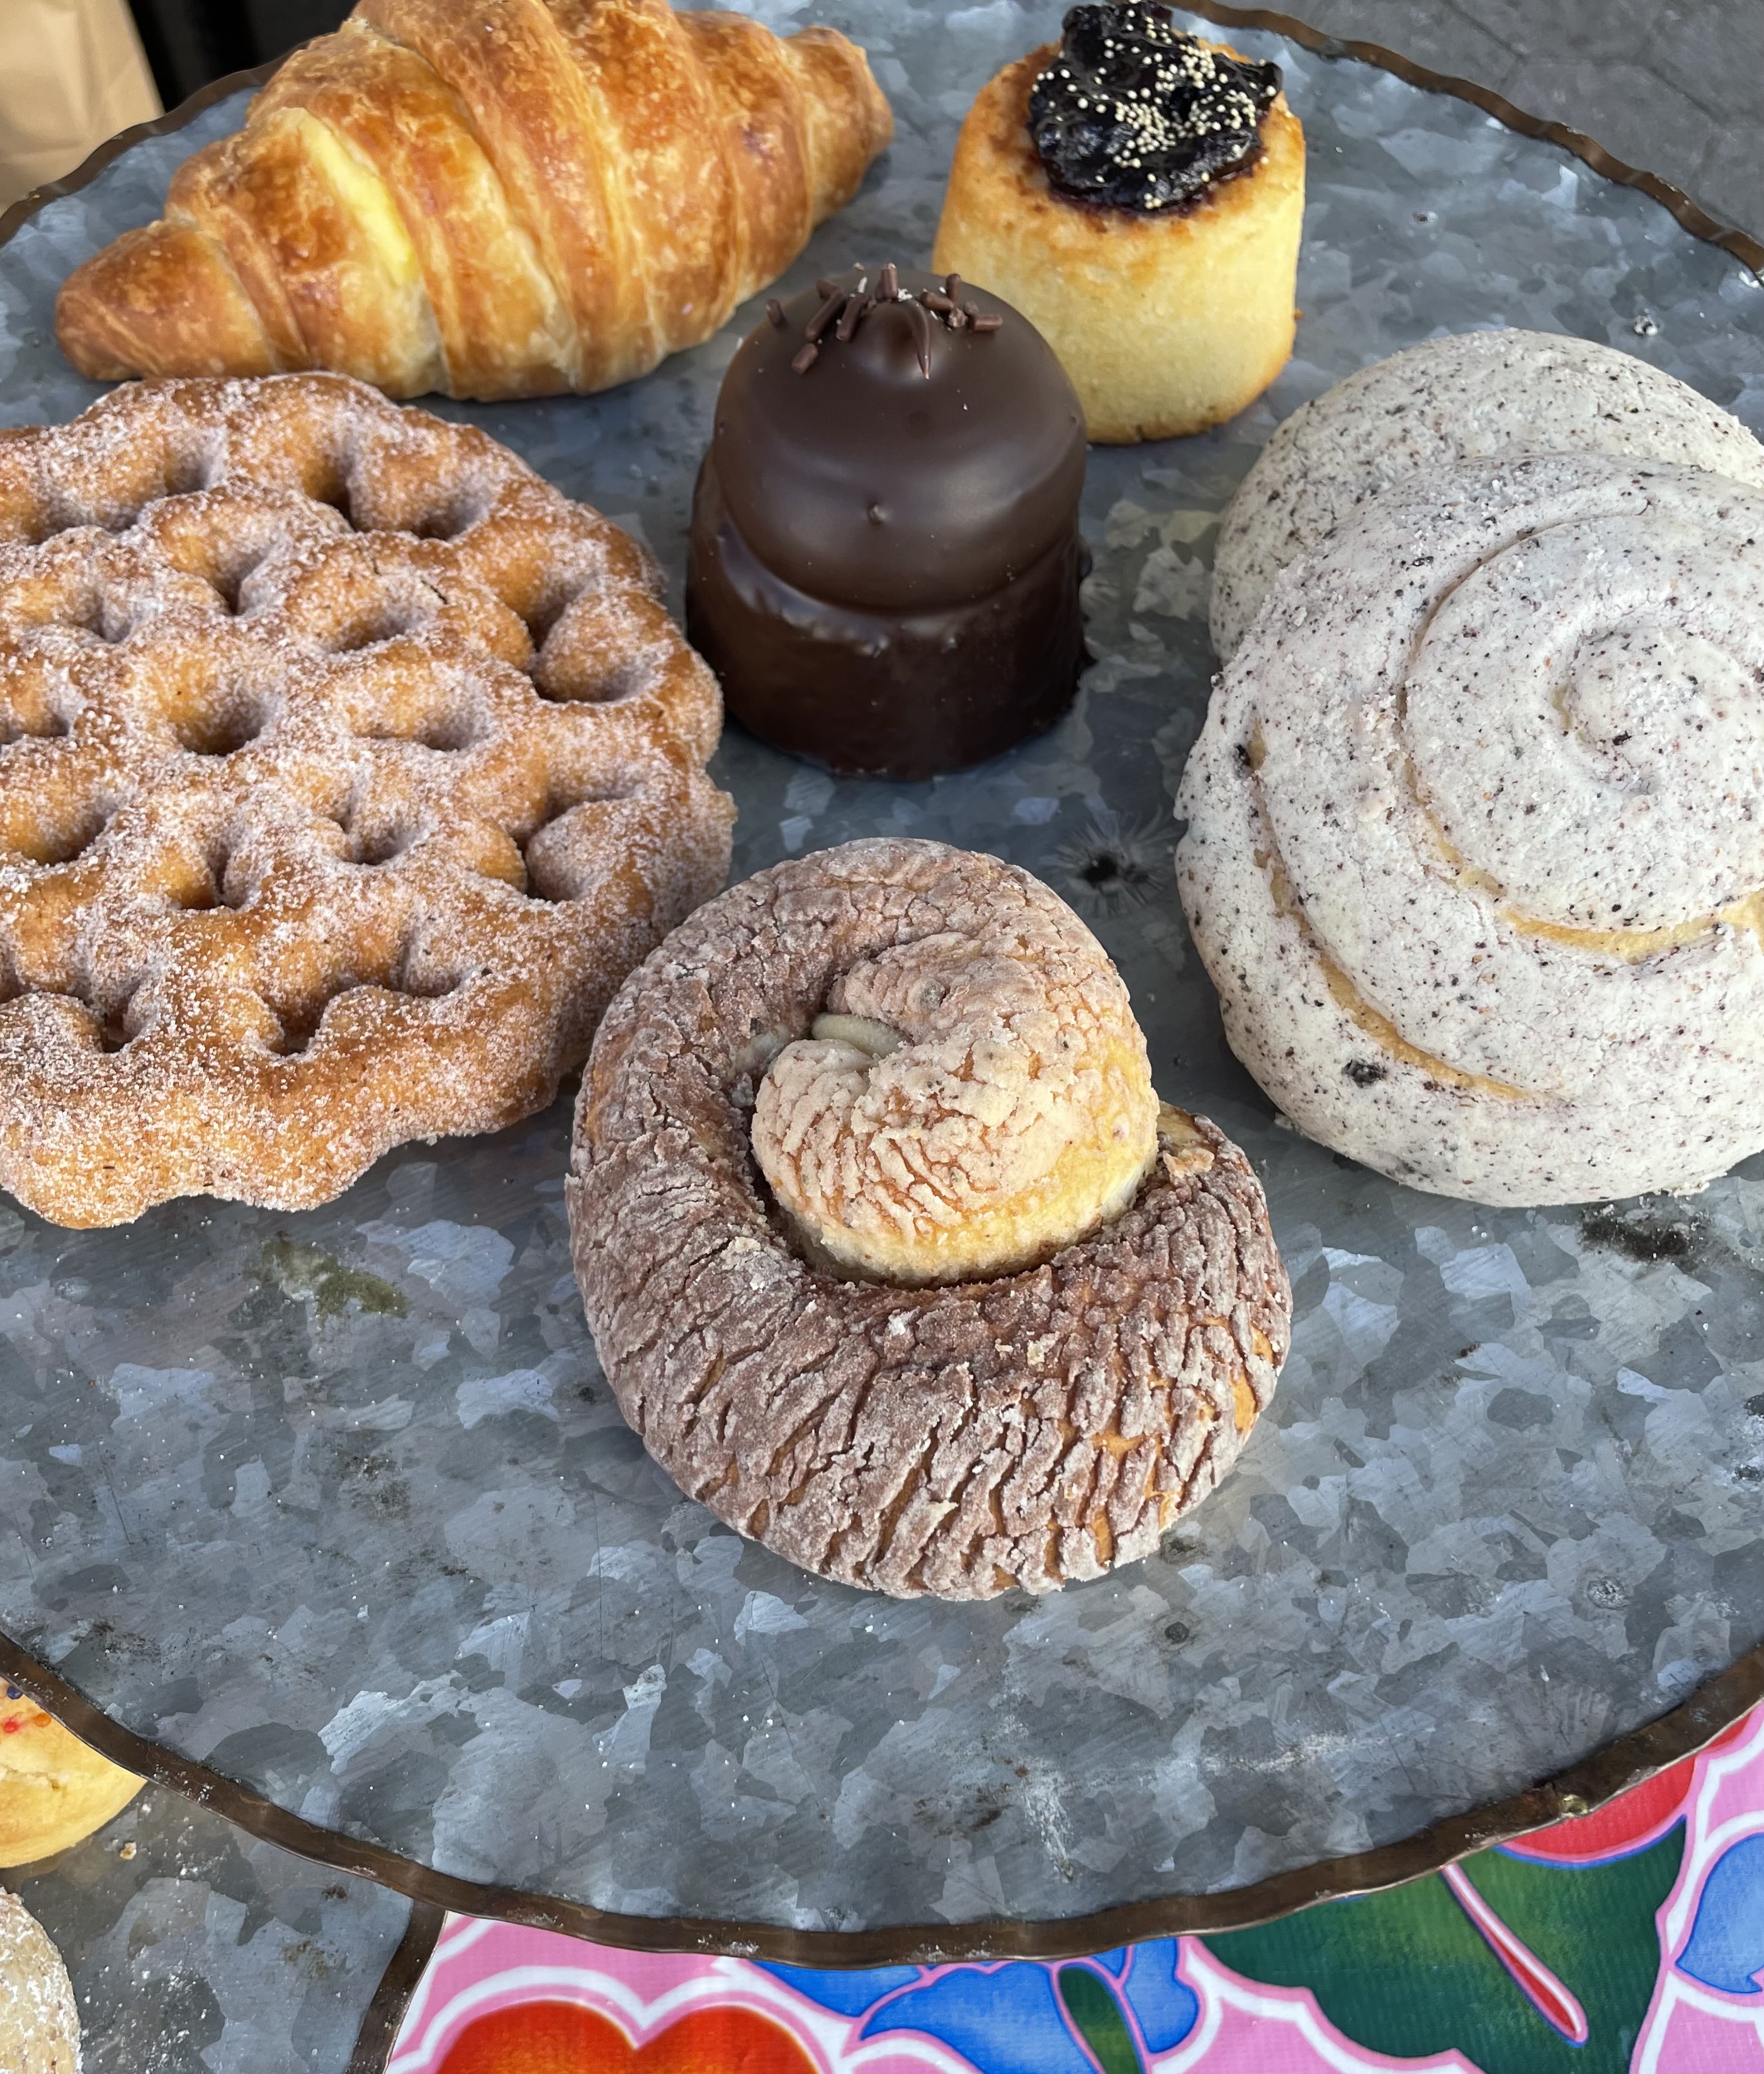 Mexican pastries from Norte 54 in San Francisco